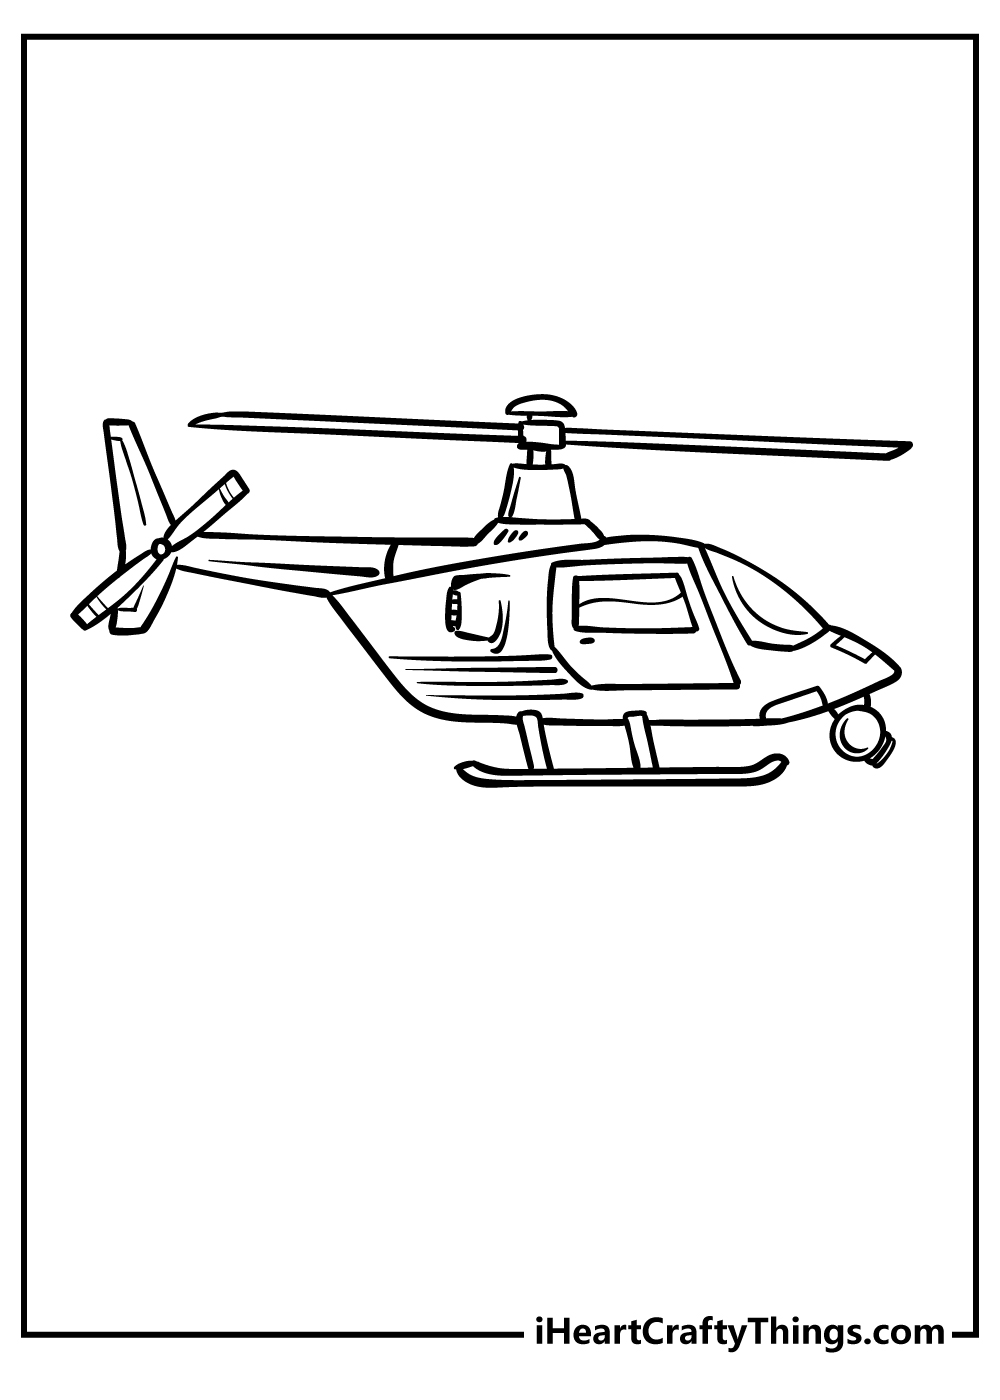 Helicopter Coloring Pages for preschoolers free printable